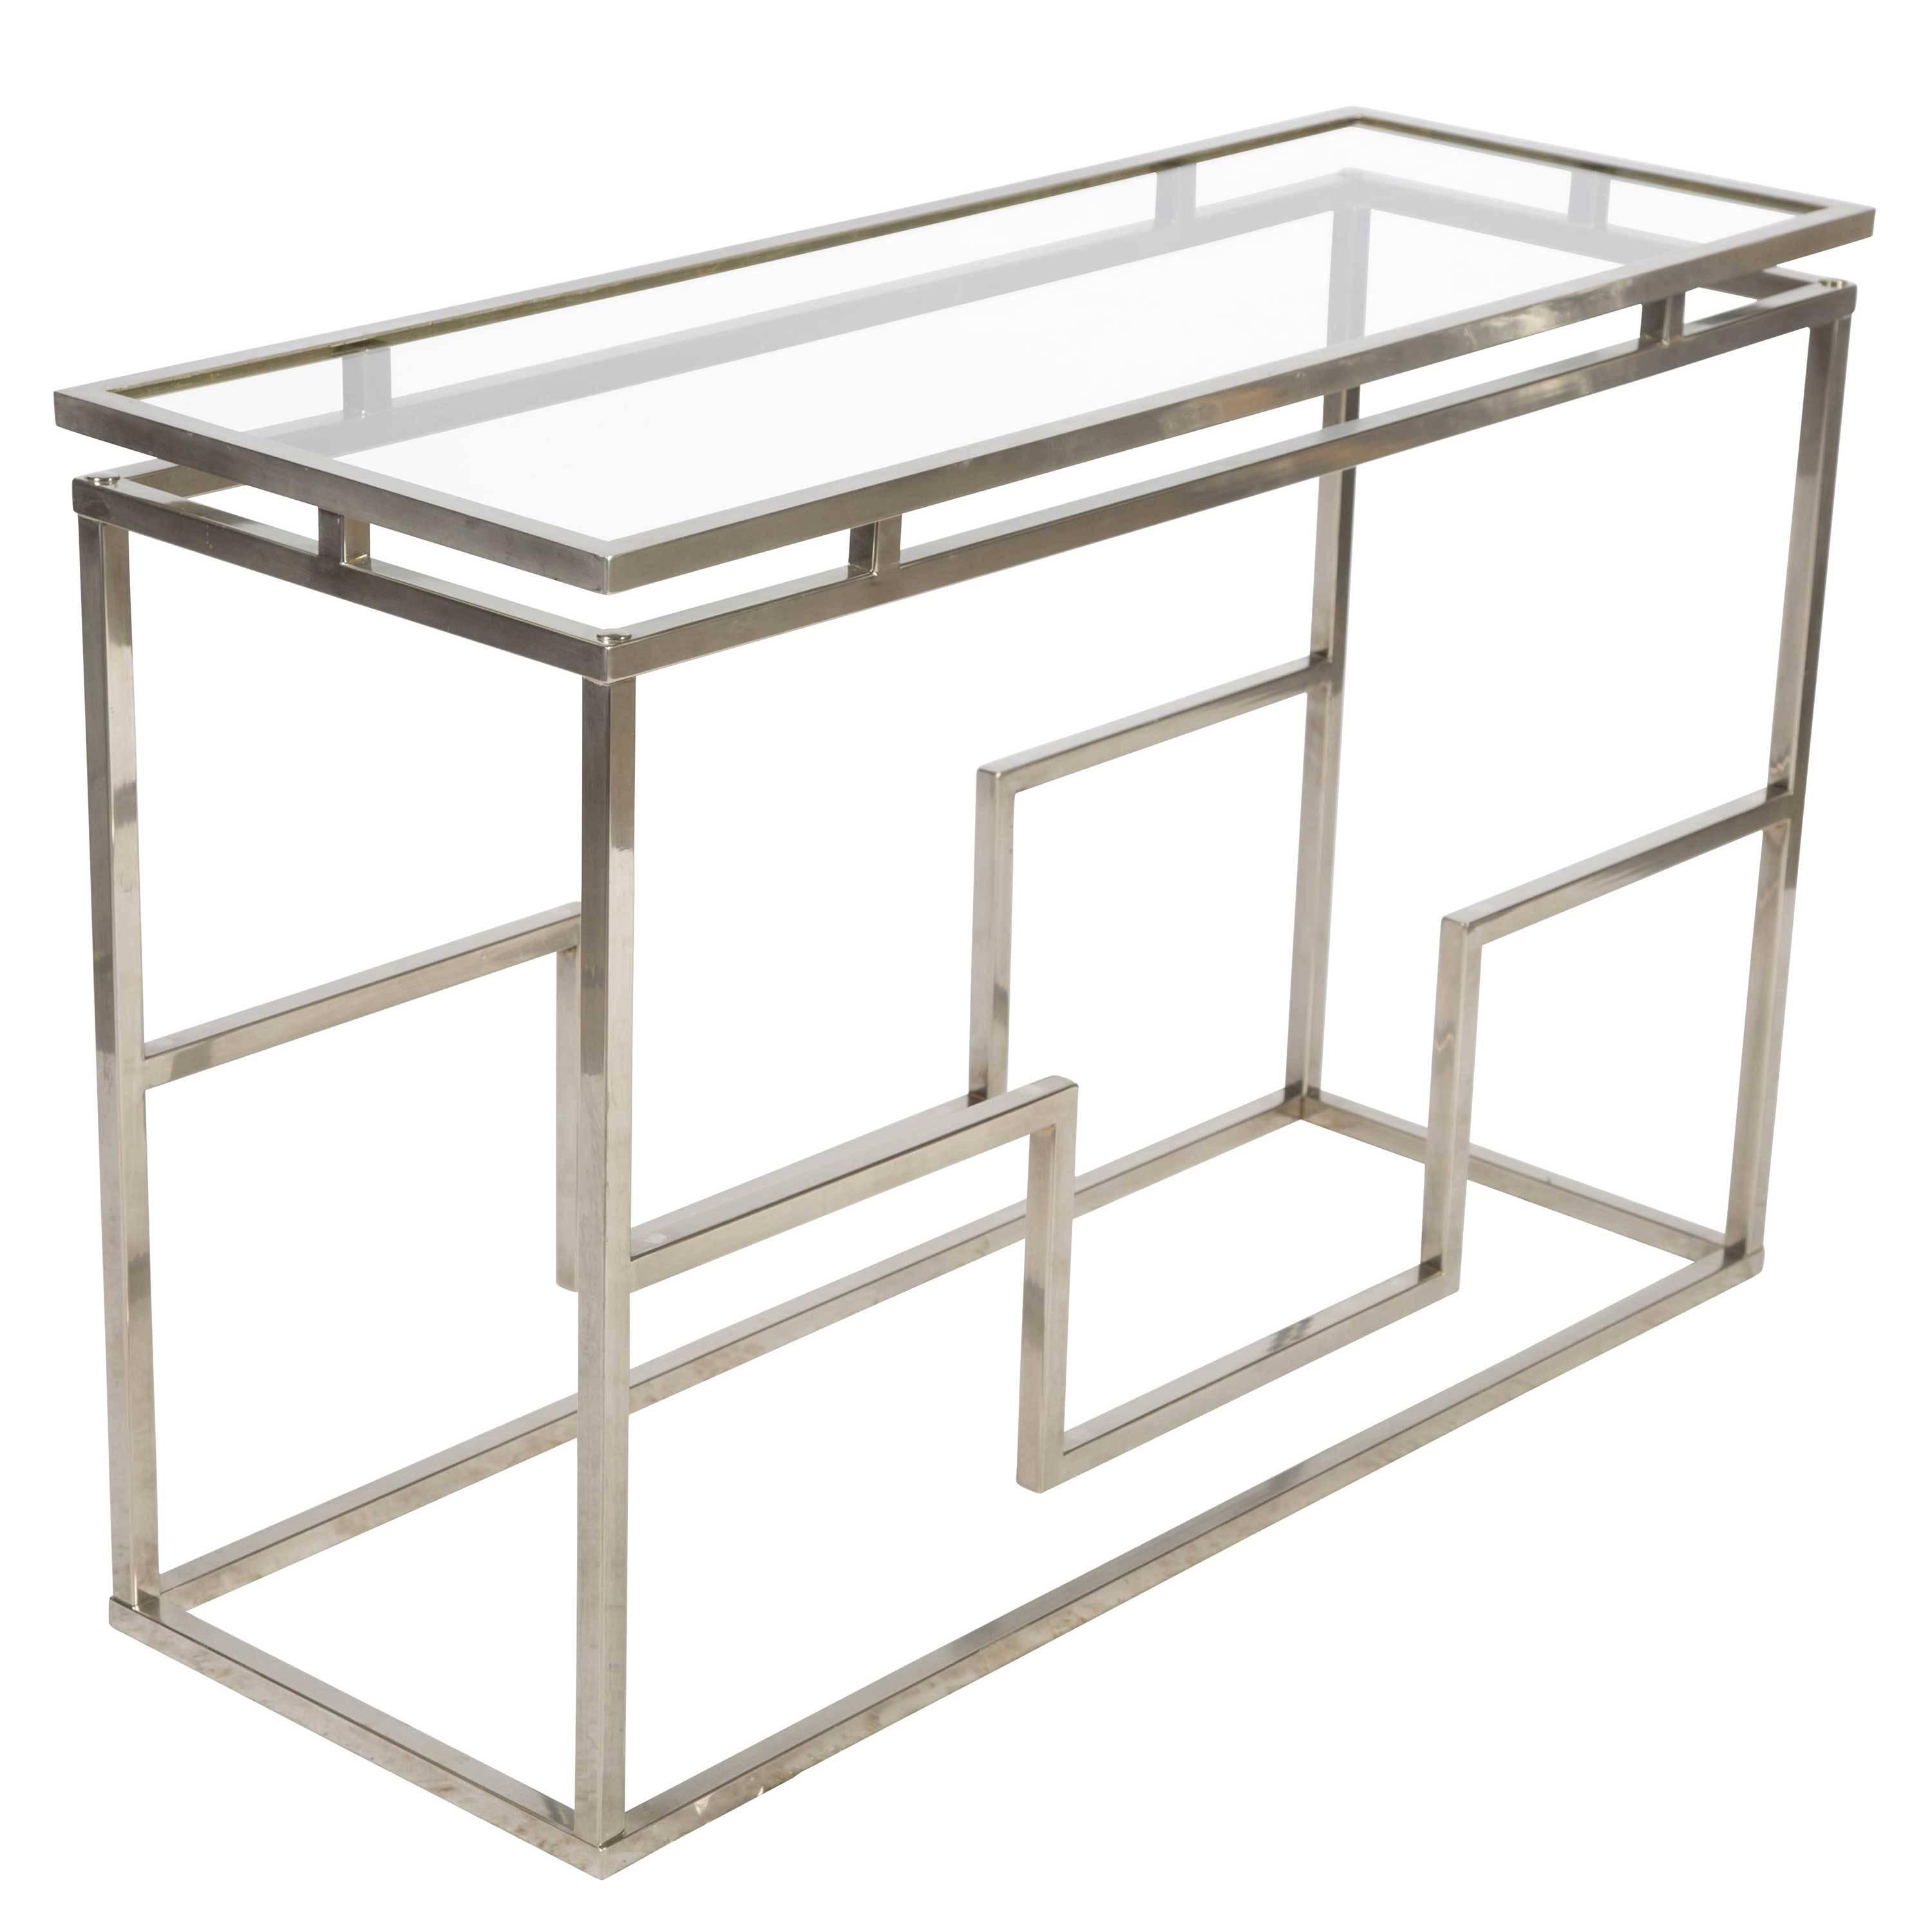 Stylish 1980s French tubular chrome and glass console table or display shelves.